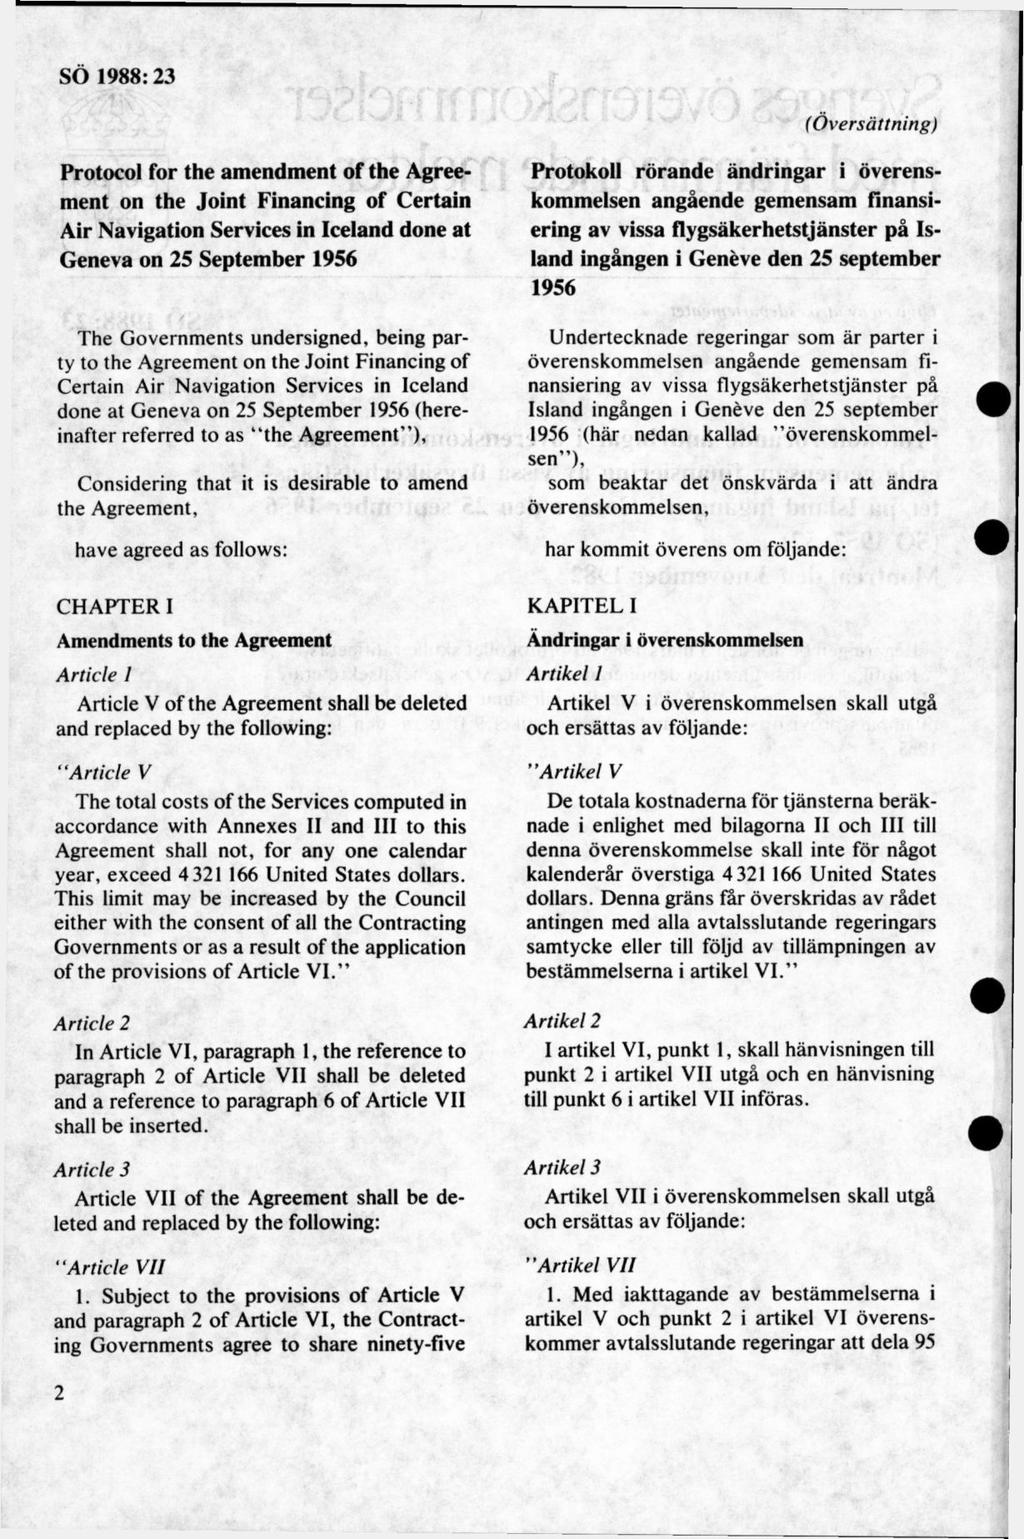 (Översättning) Protocol for the amendment of the Agreement on the Joint Financing of Certain Air Navigation Services in leeland done at Geneva on 25 September 1956 The G overnm ents undersigned,